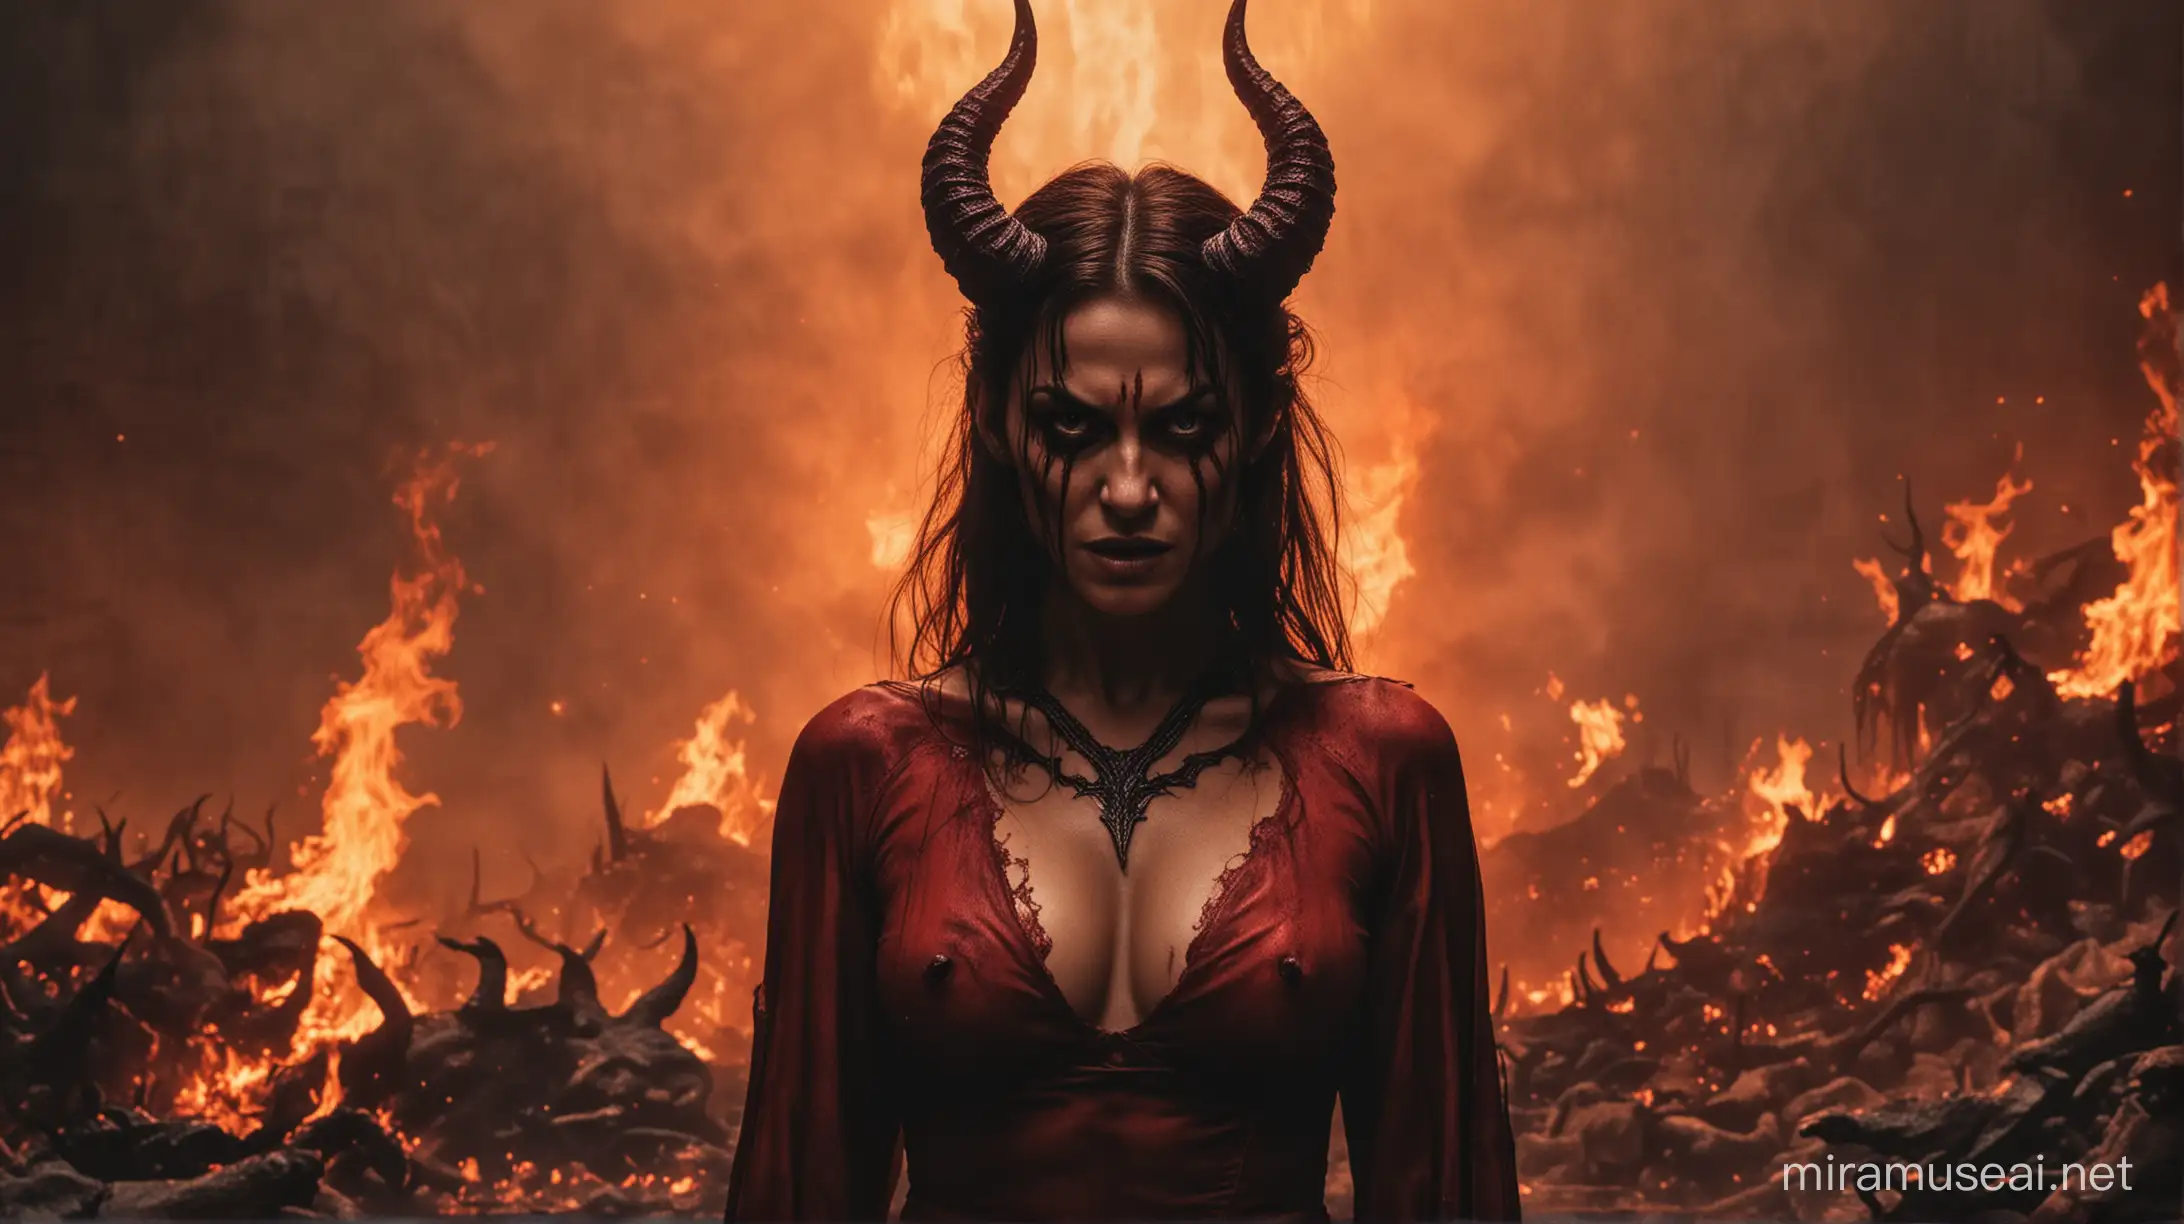 Sinister Woman in Hells Domain